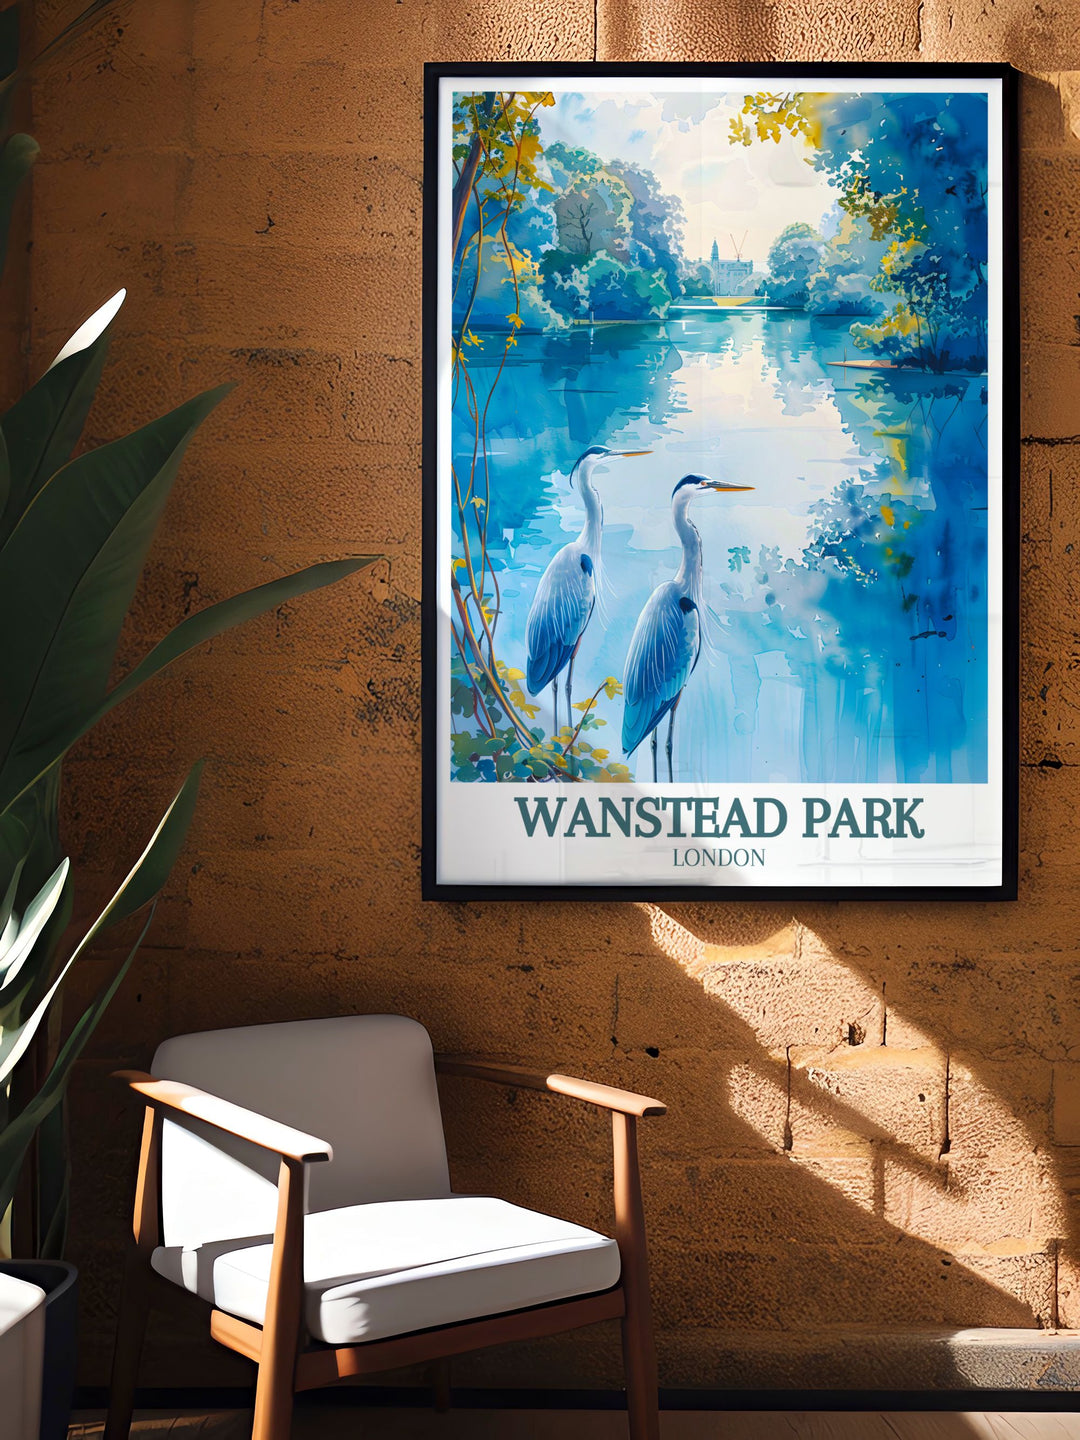 Beautifully crafted Wanstead Park travel poster highlighting the natural beauty and picturesque scenes of this beloved East London park. Ideal for anyone looking to add a touch of nature and elegance to their home or office decor.